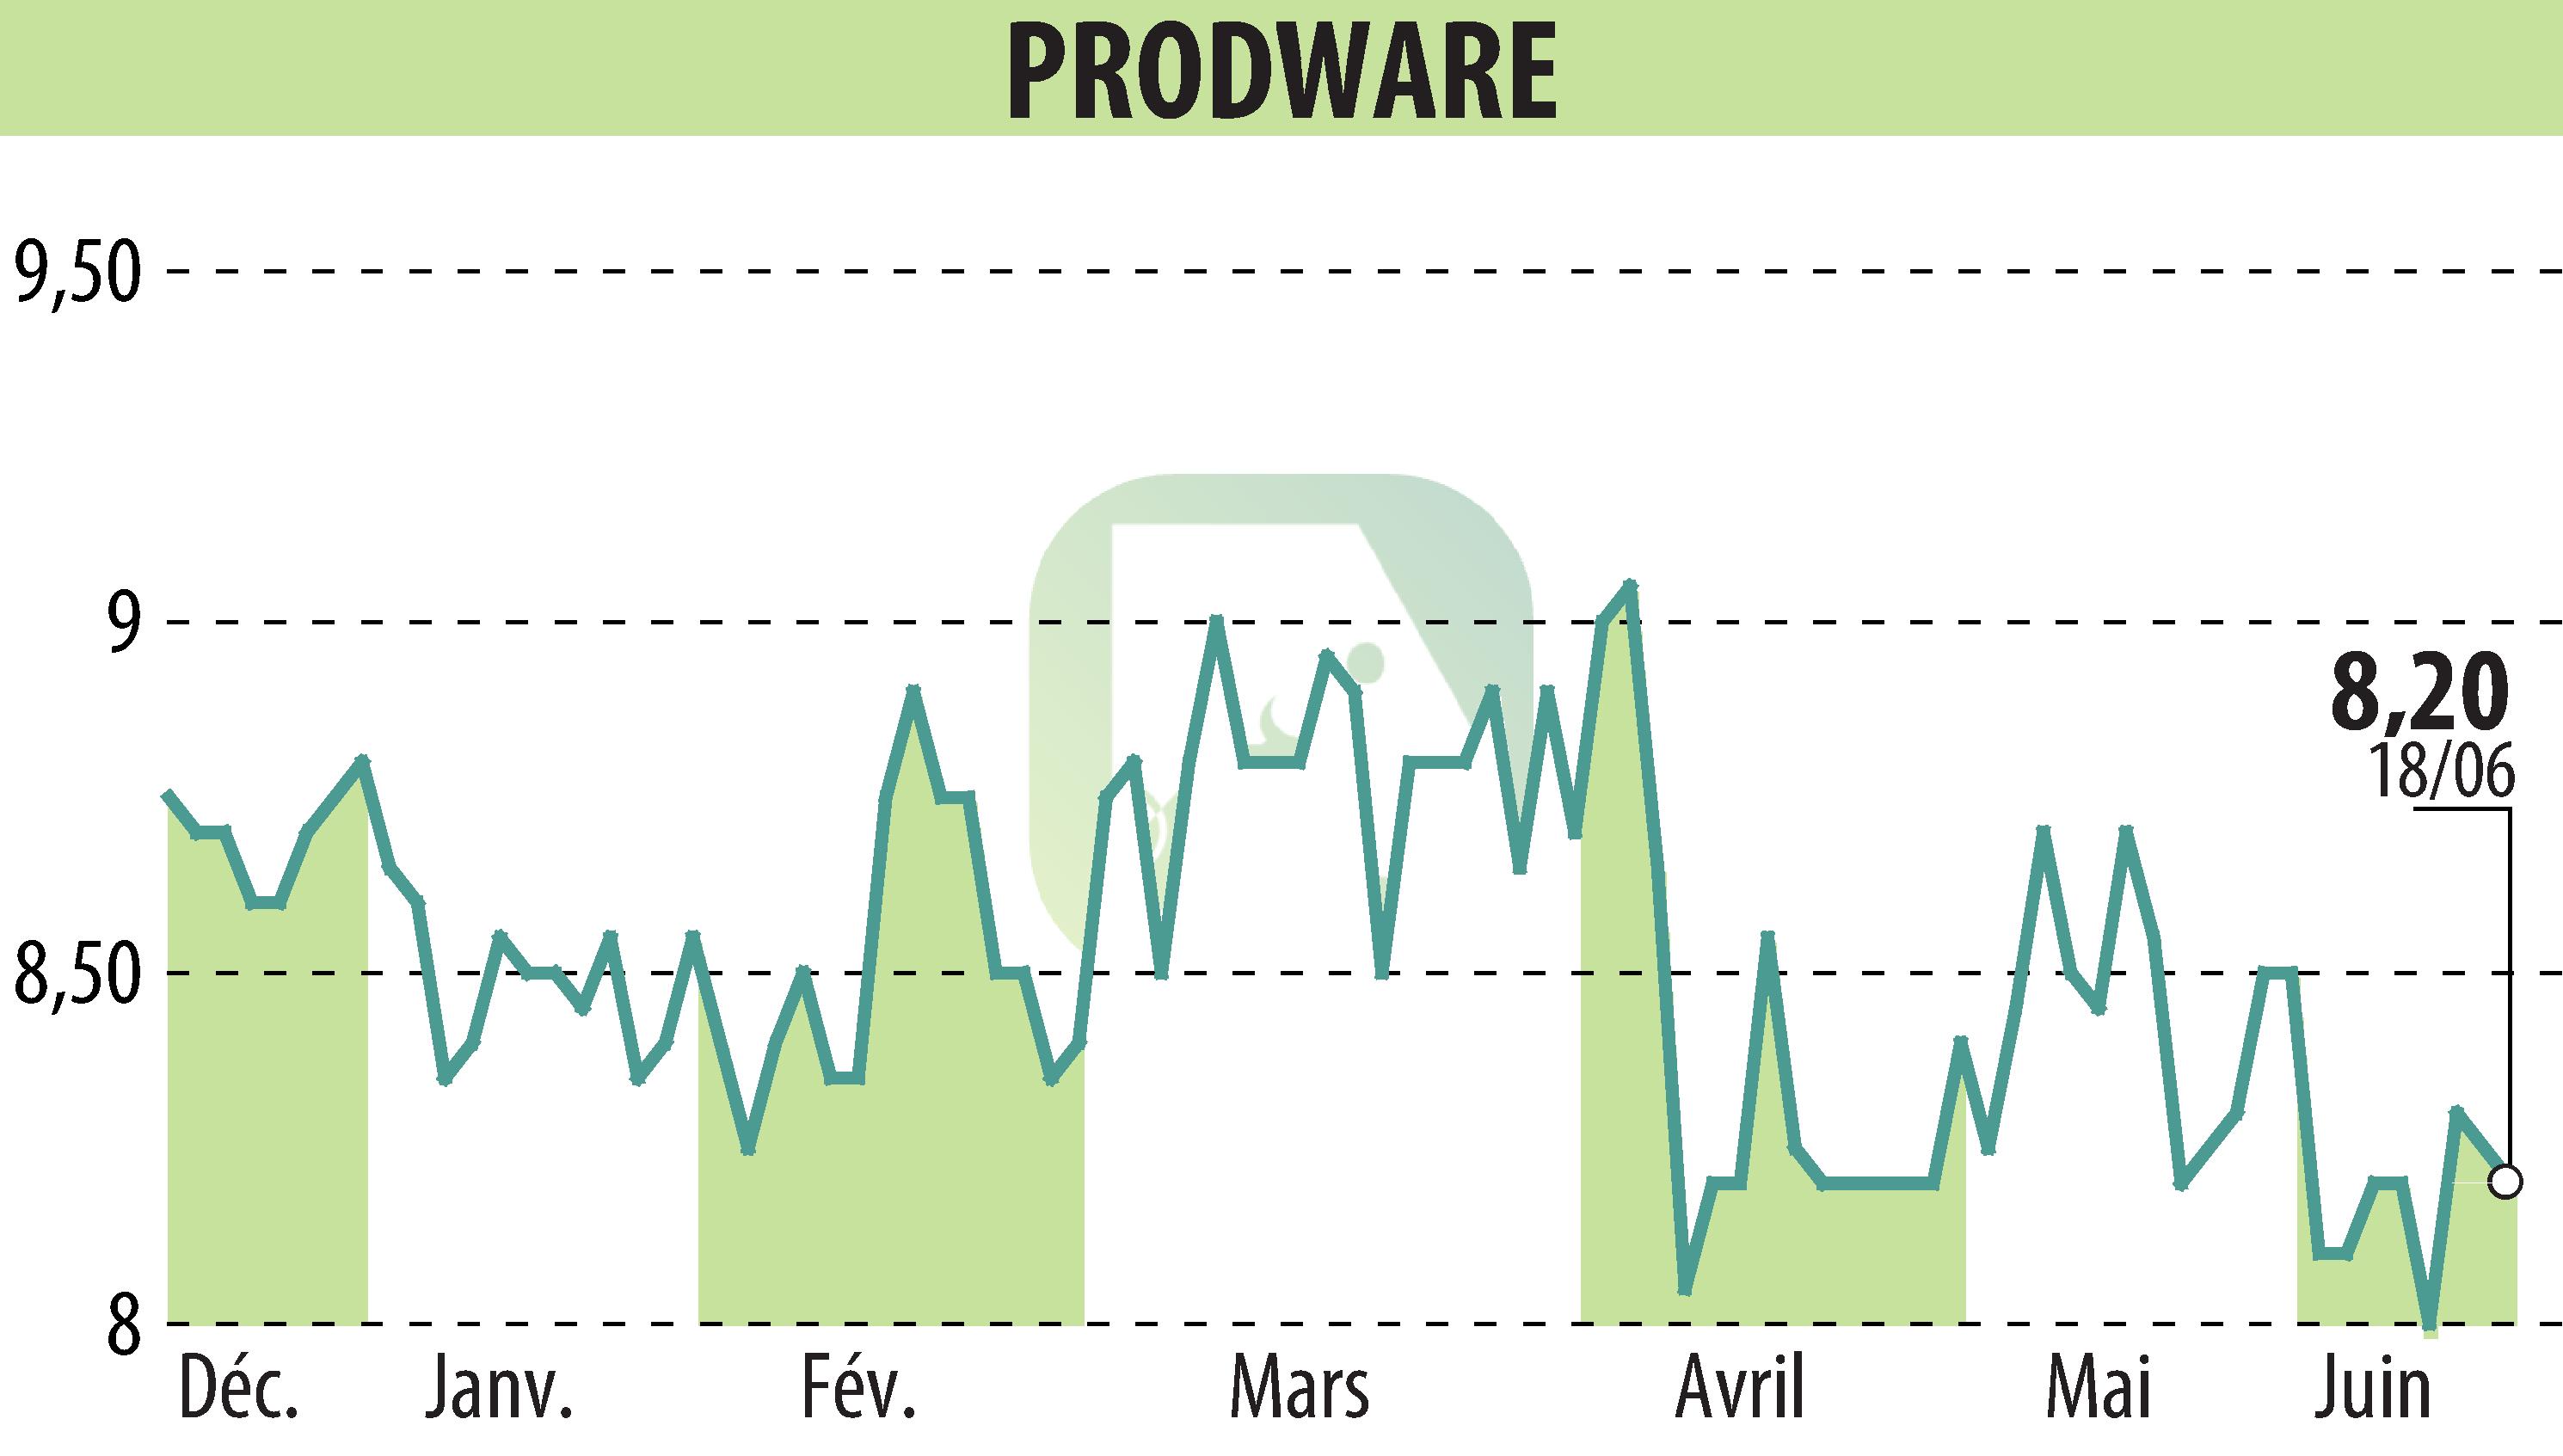 Stock price chart of PRODWARE (EPA:ALPRO) showing fluctuations.